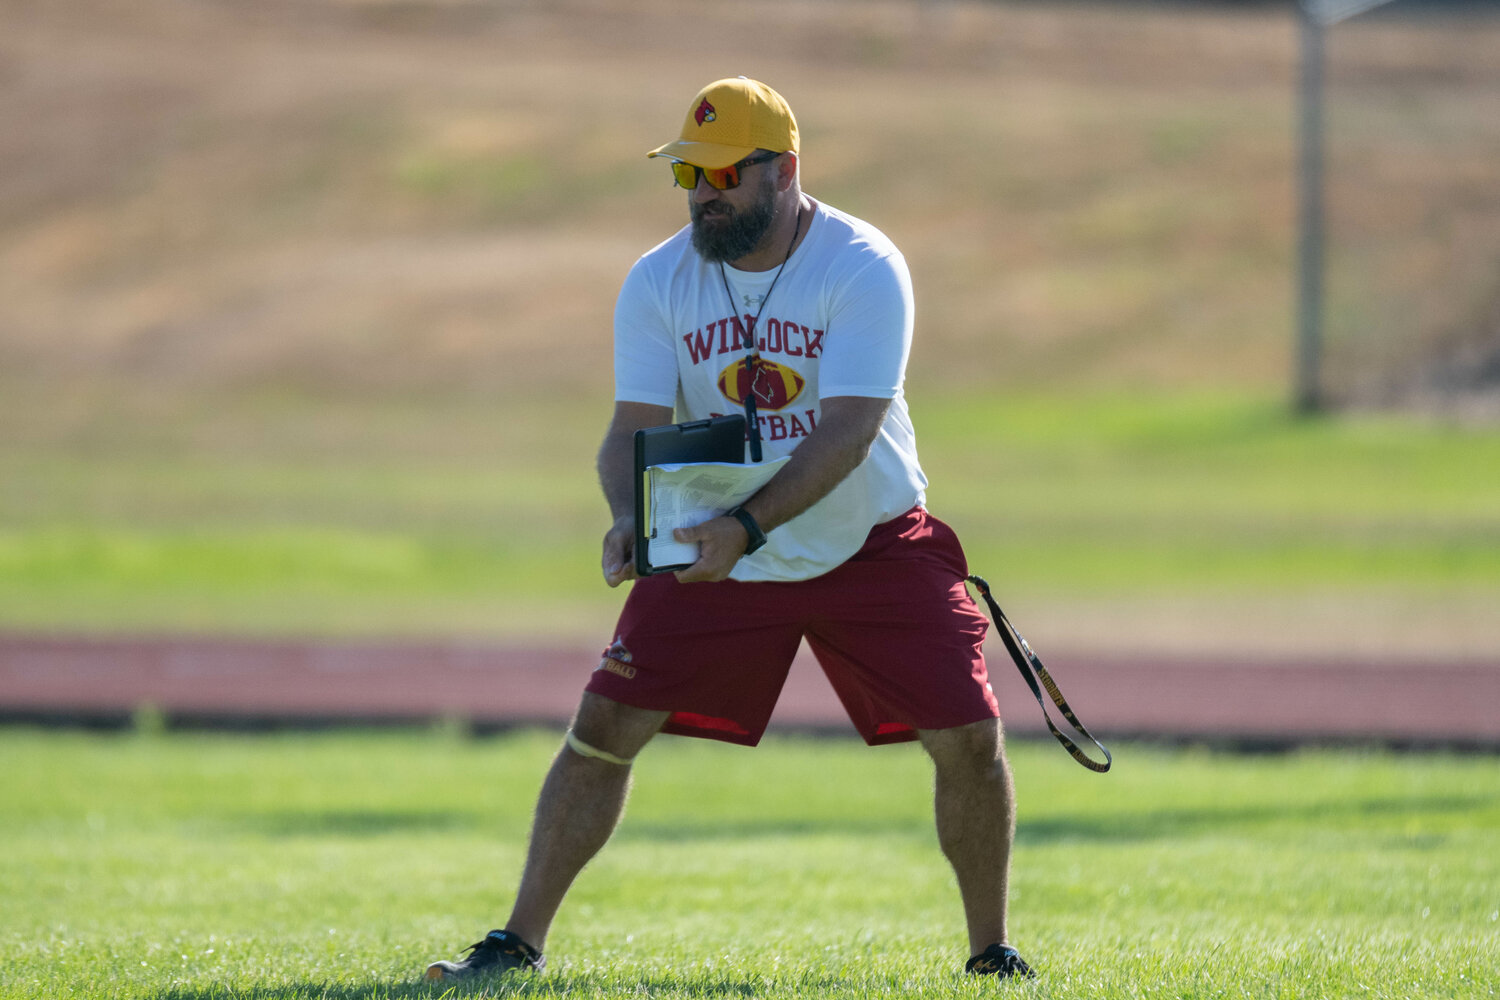 Winlock coach Ernie Samples demonstrates how he wants his quarterback to toss the football at the Cardinals' practice on Aug. 19.